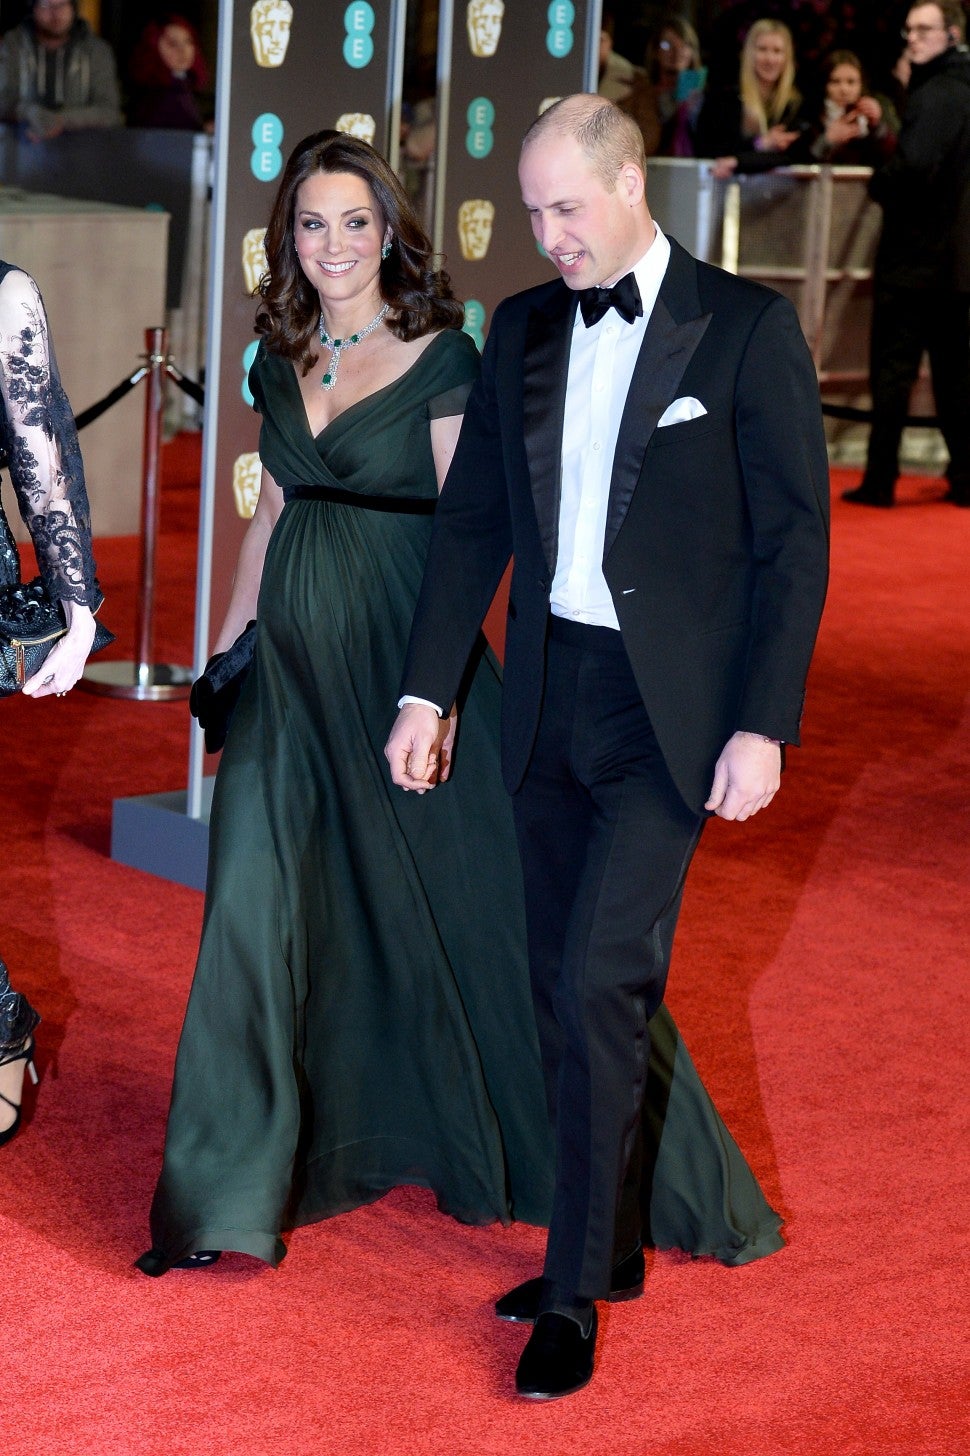 Prince William and Kate Middleton at 2018 BAFTAs